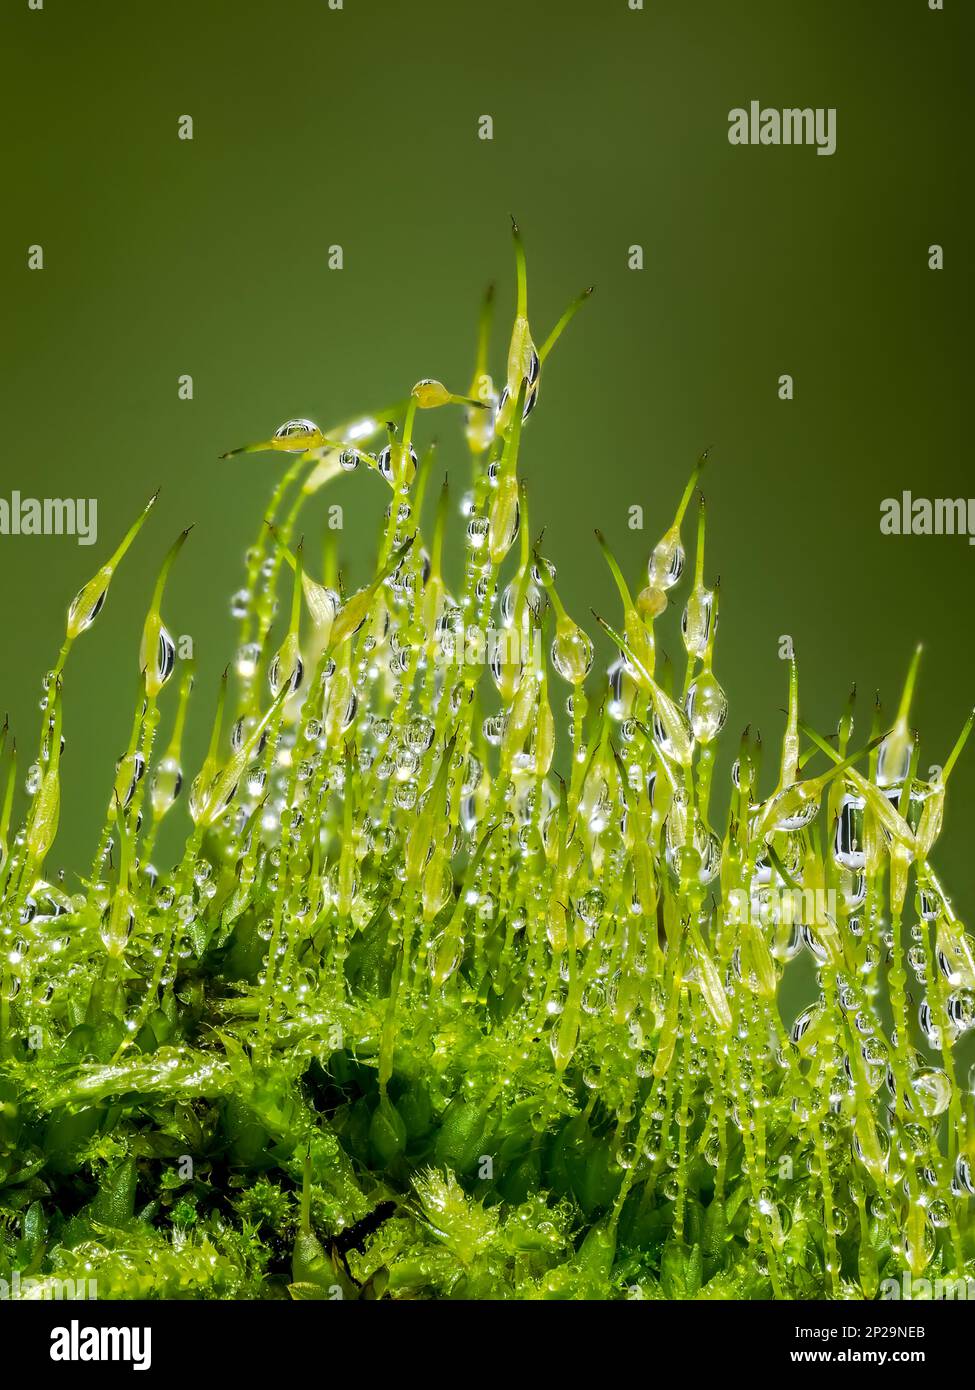 Seed heads of a moss plant, covered in dewdrops and photographed against a green background Stock Photo